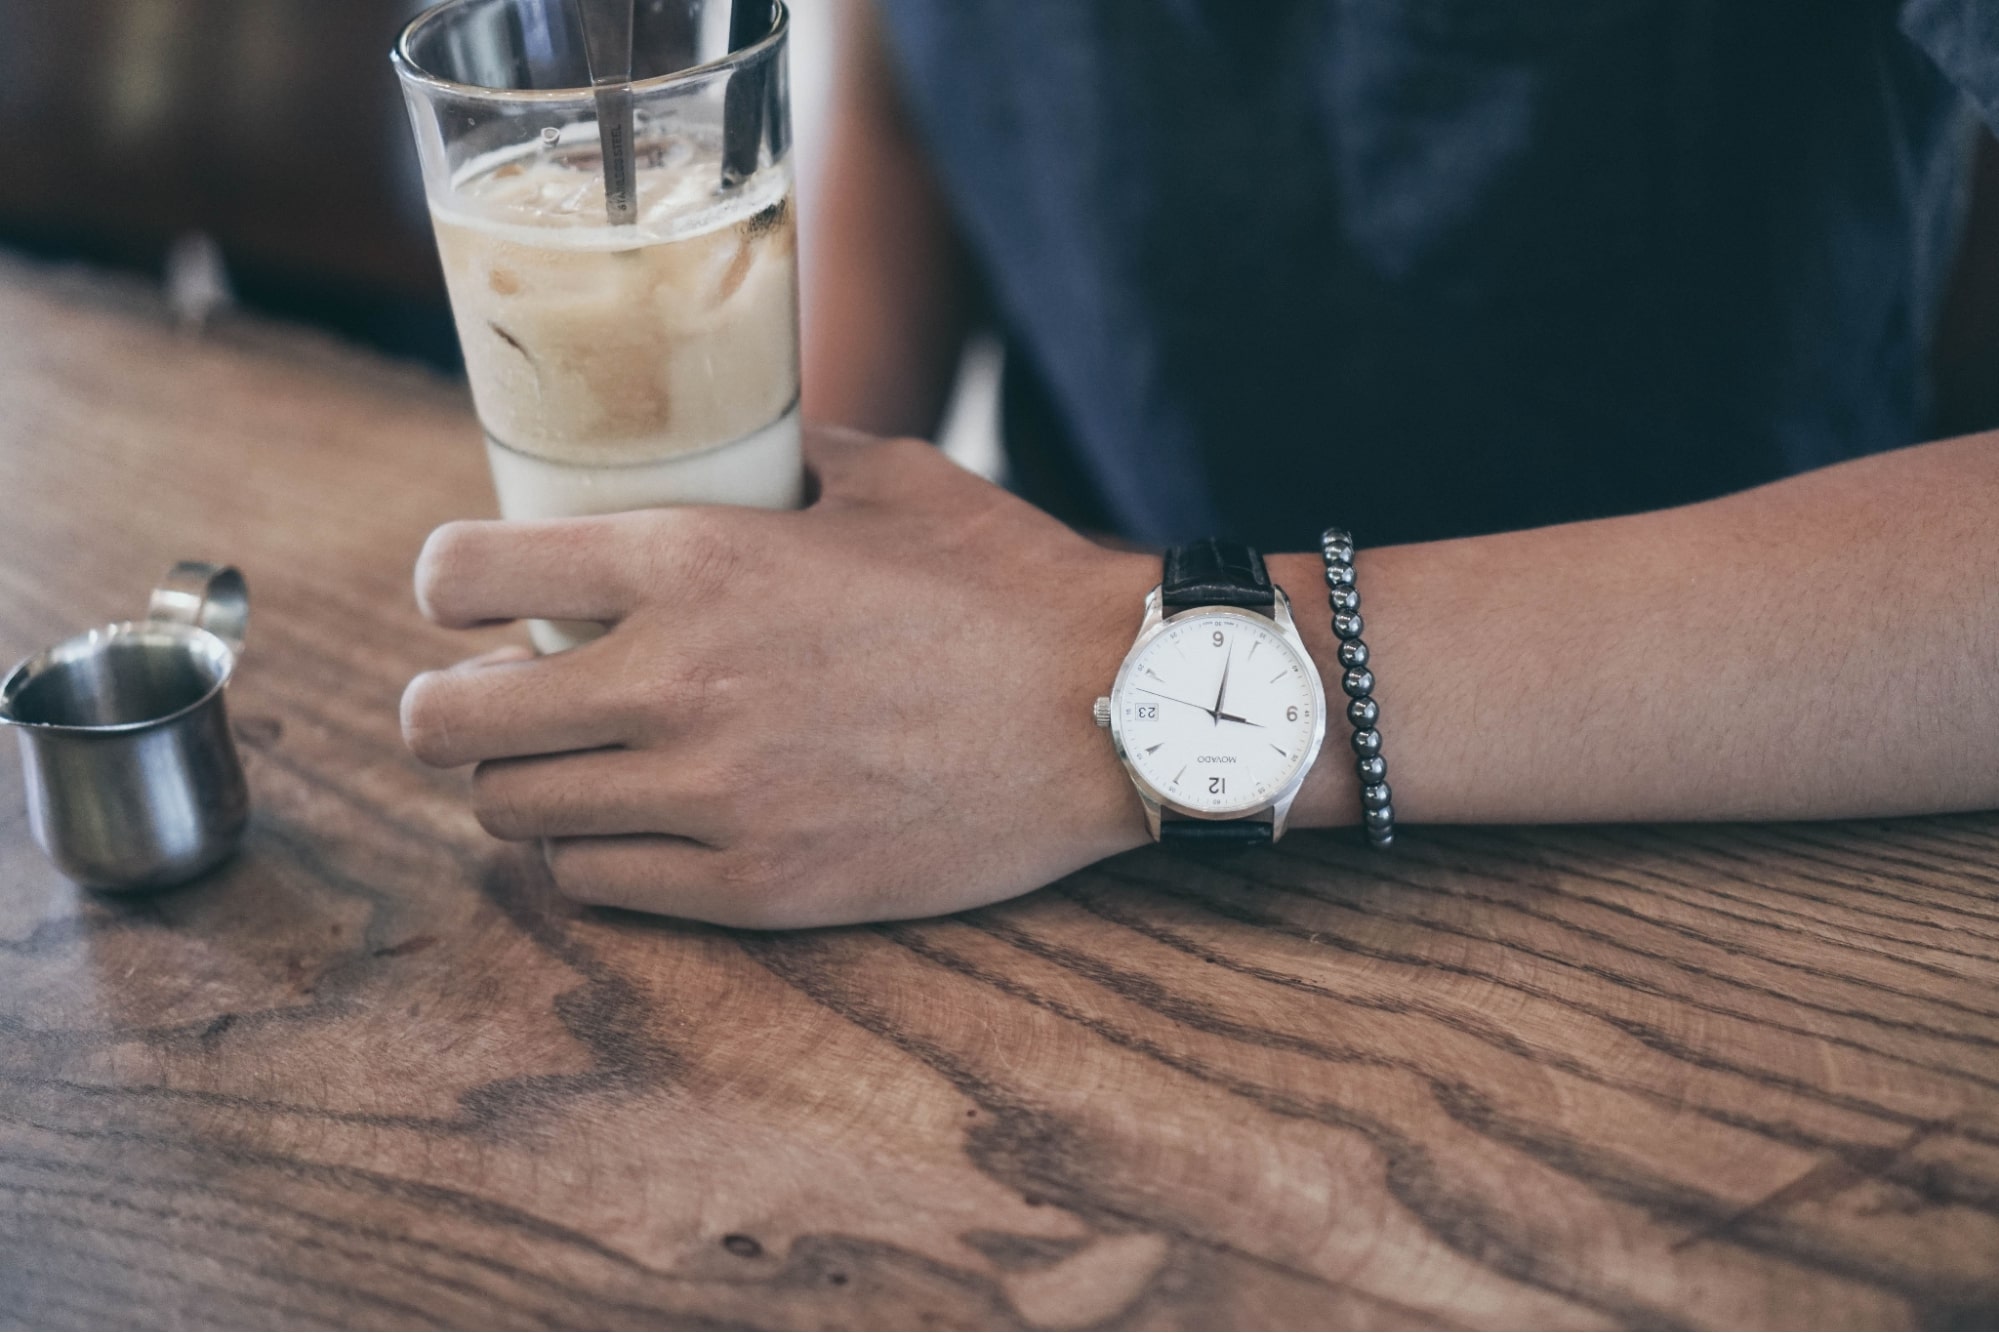 A man wearing a watch with a leather band sips his iced coffee at a diner